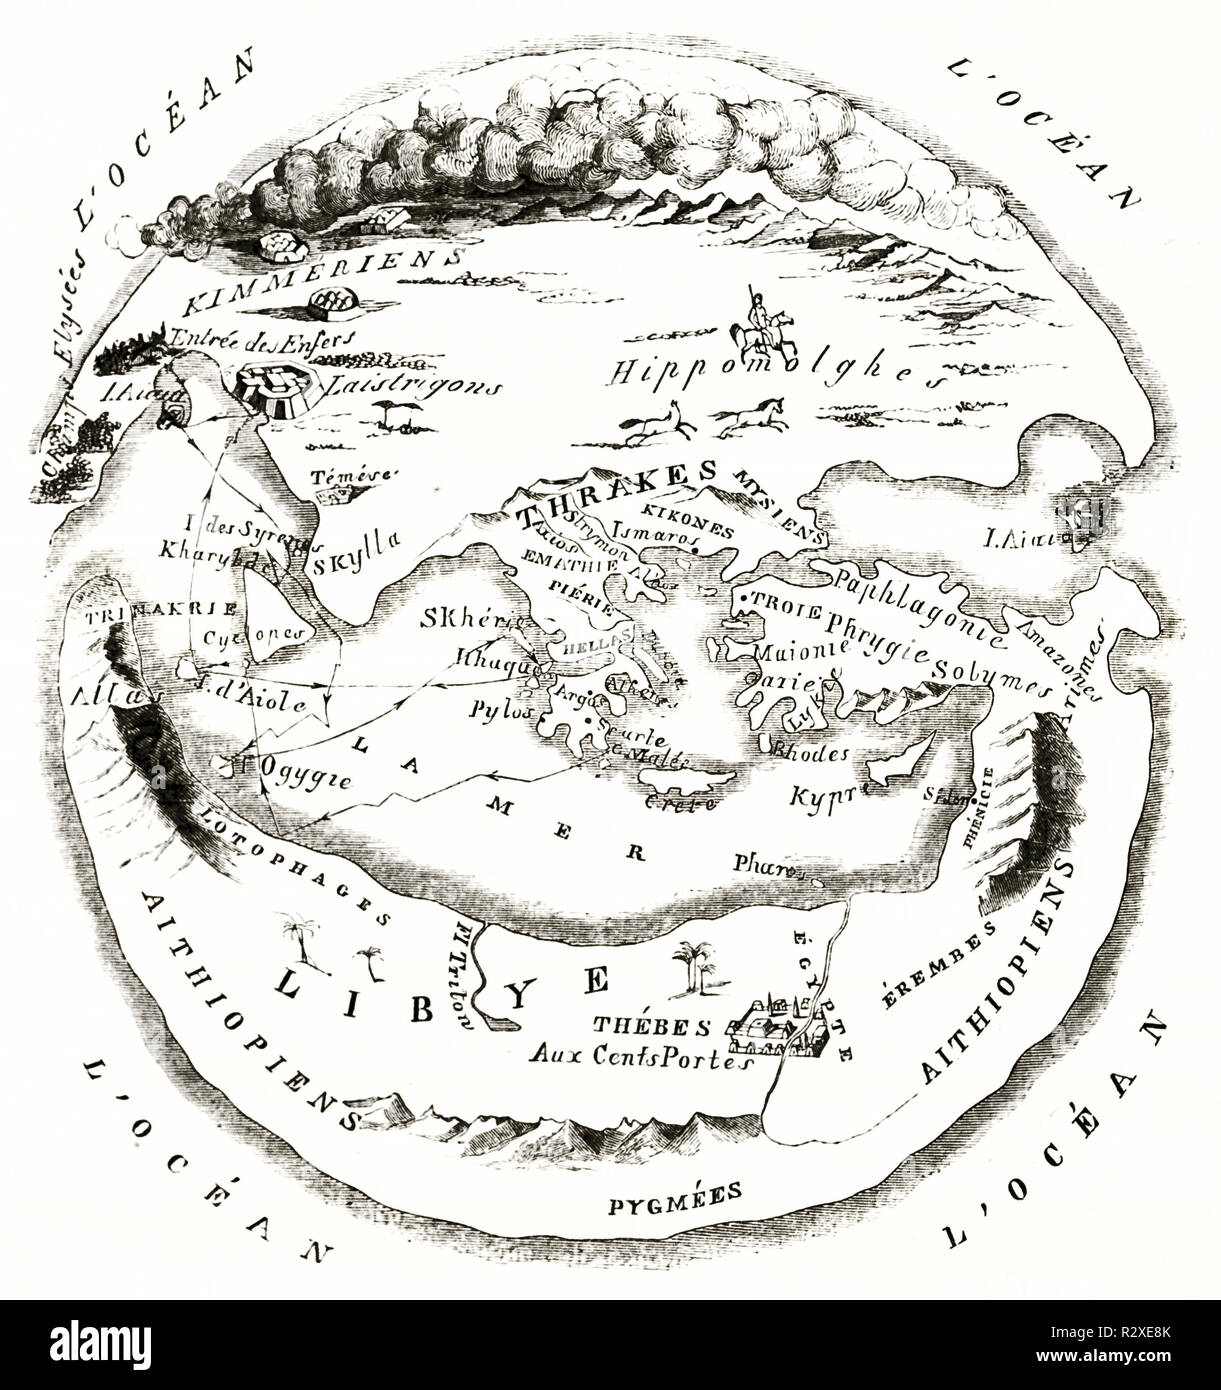 Homer old map (10th century b.C.). By MacCarthy, publ. on Magasin Pittoresque, Paris, 1846 Stock Photo